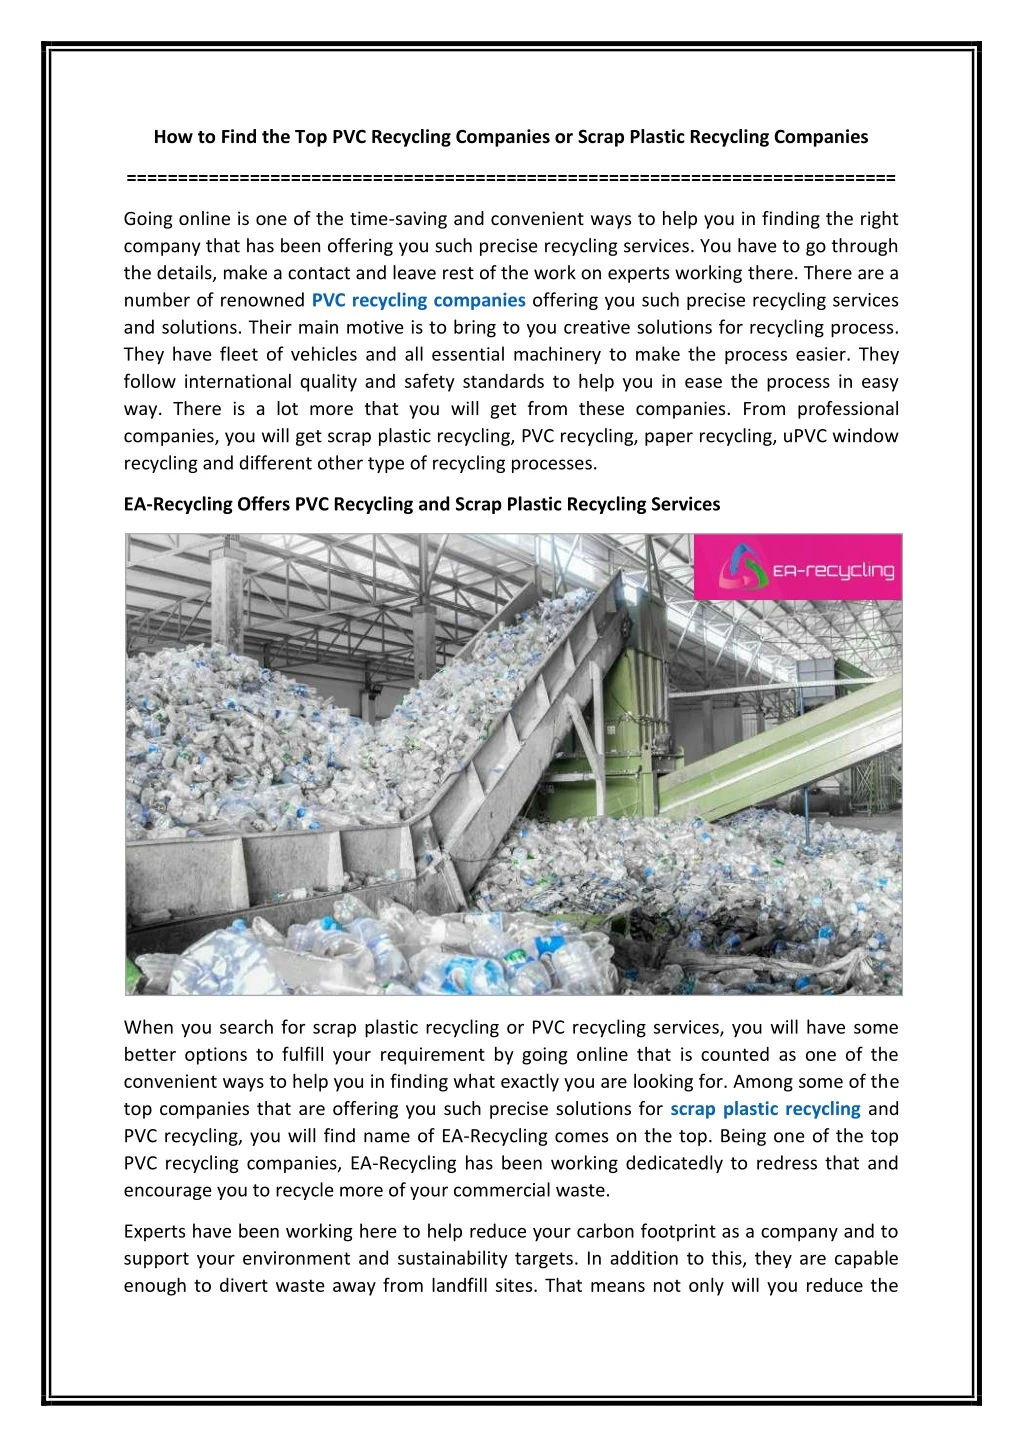 how to find the top pvc recycling companies